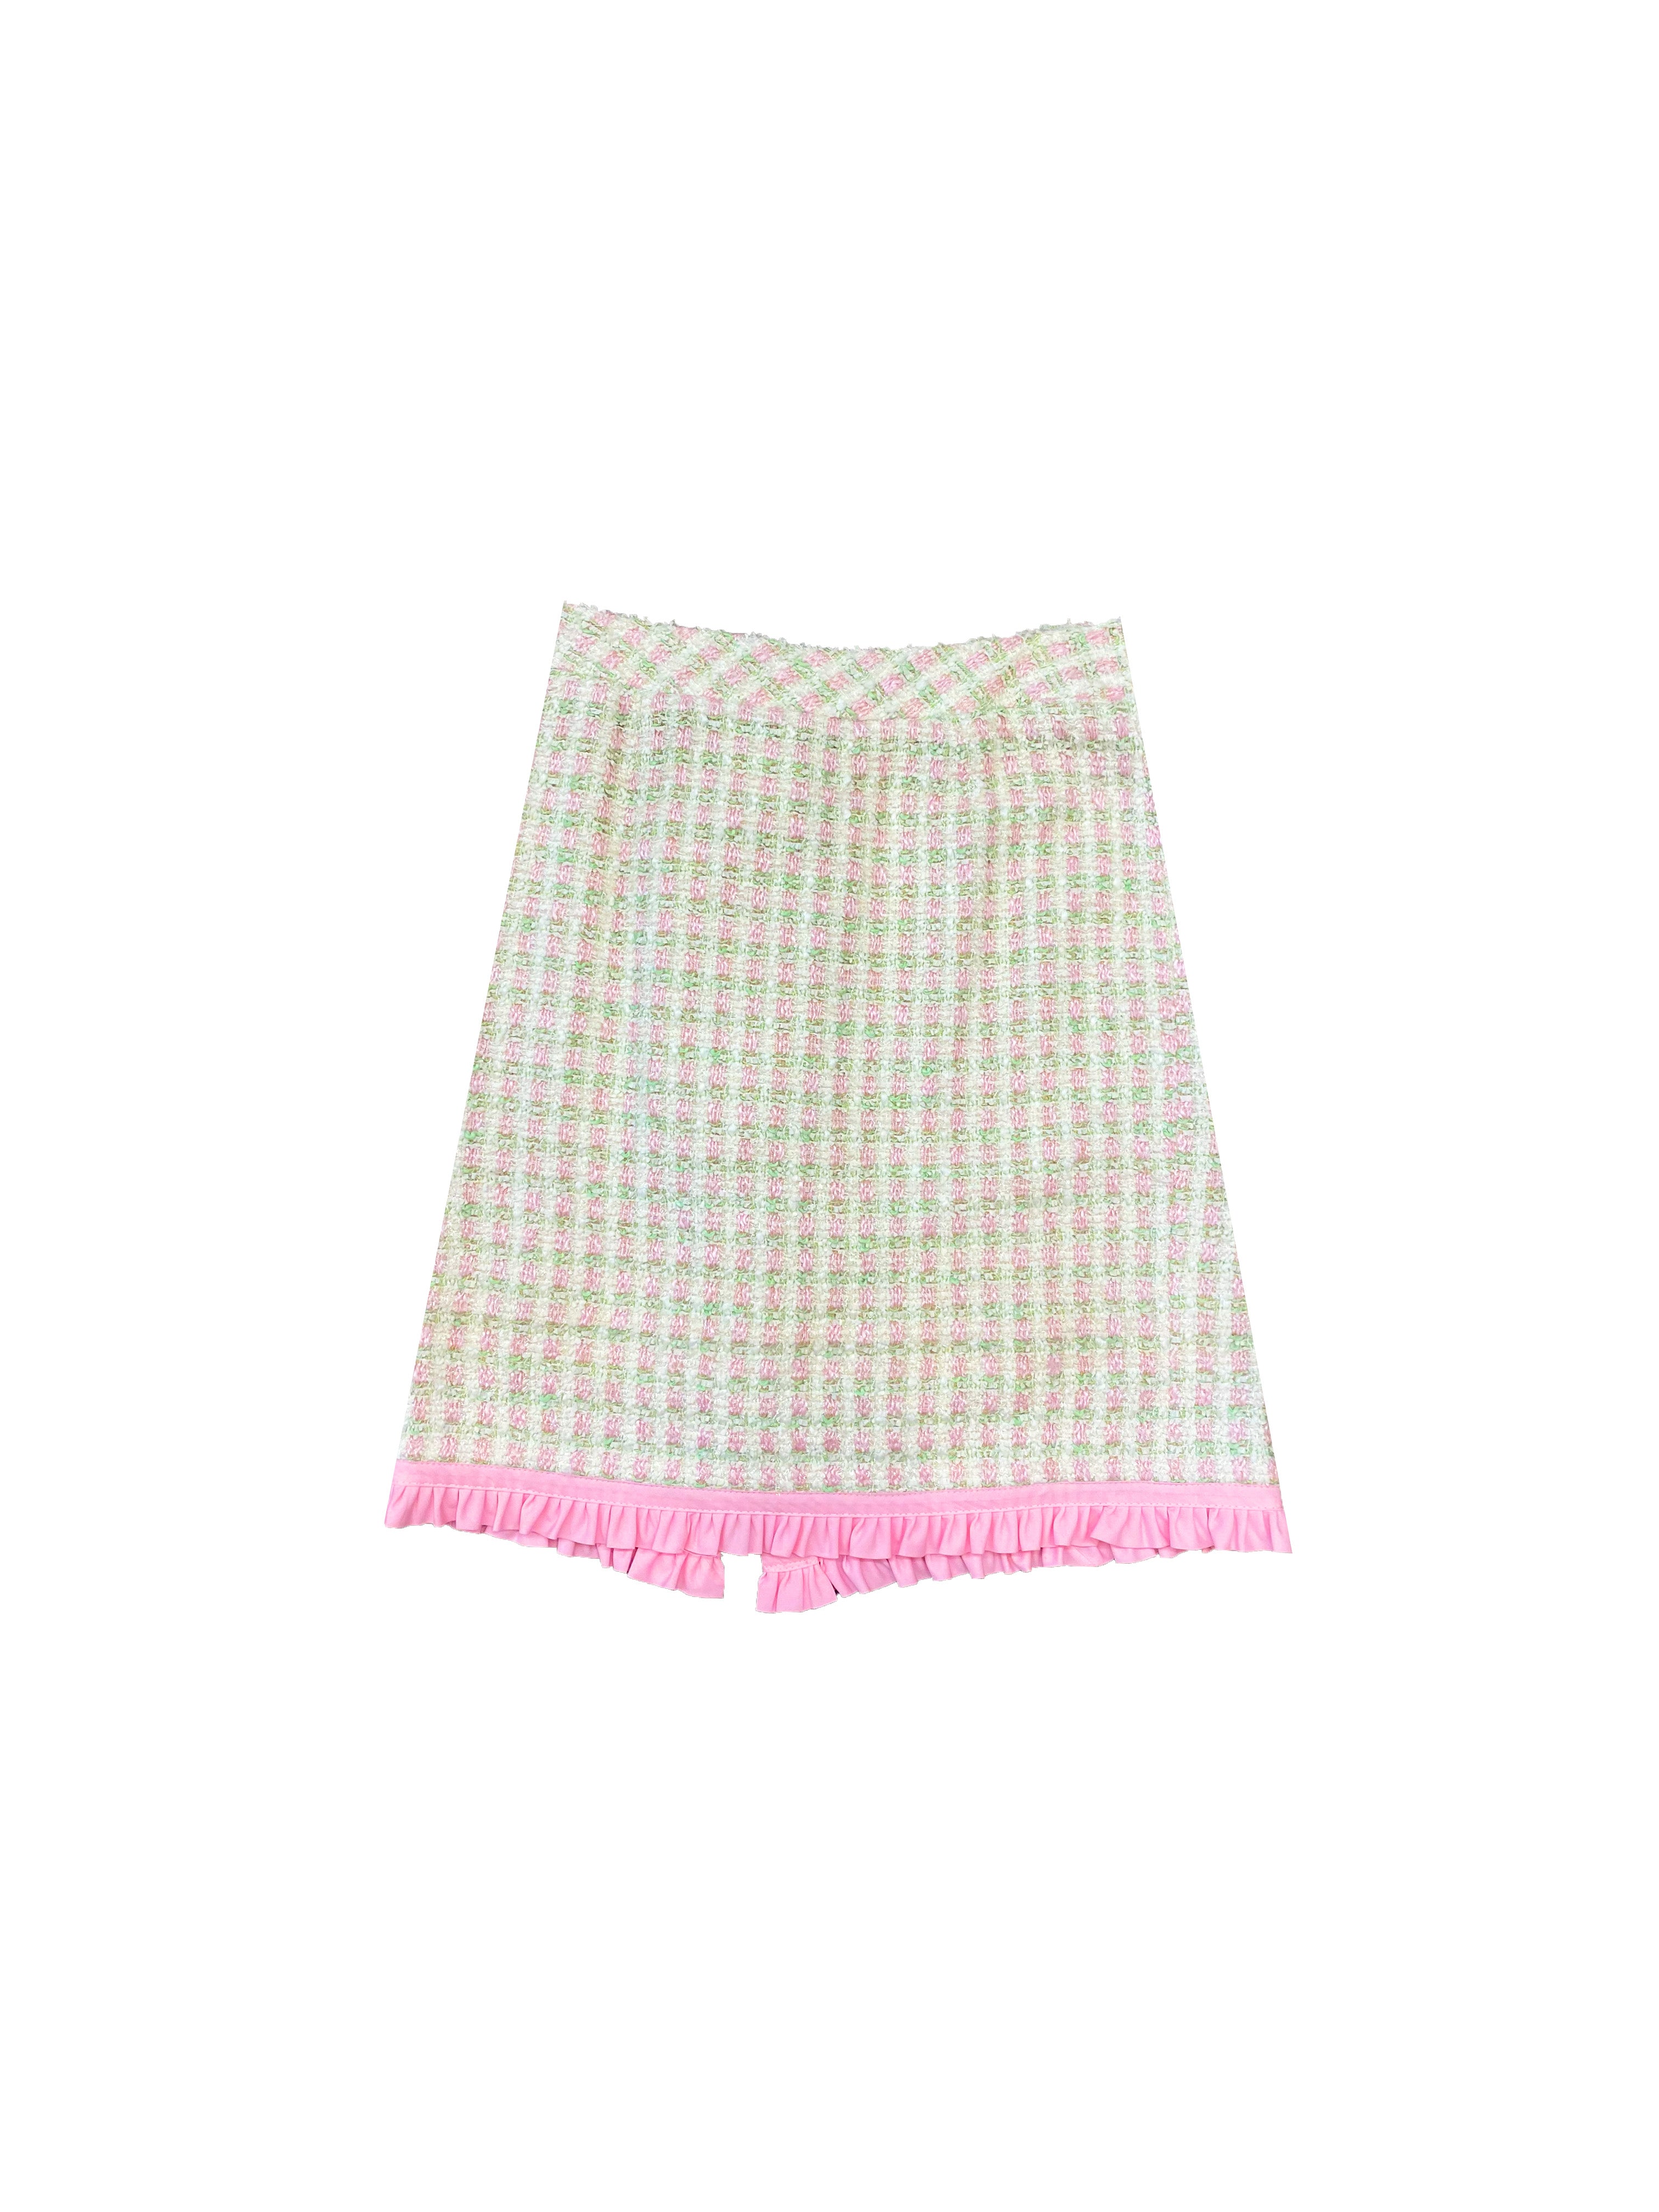 Chanel Black, Pink and Green Tweed Top and Mini Skirt Set with